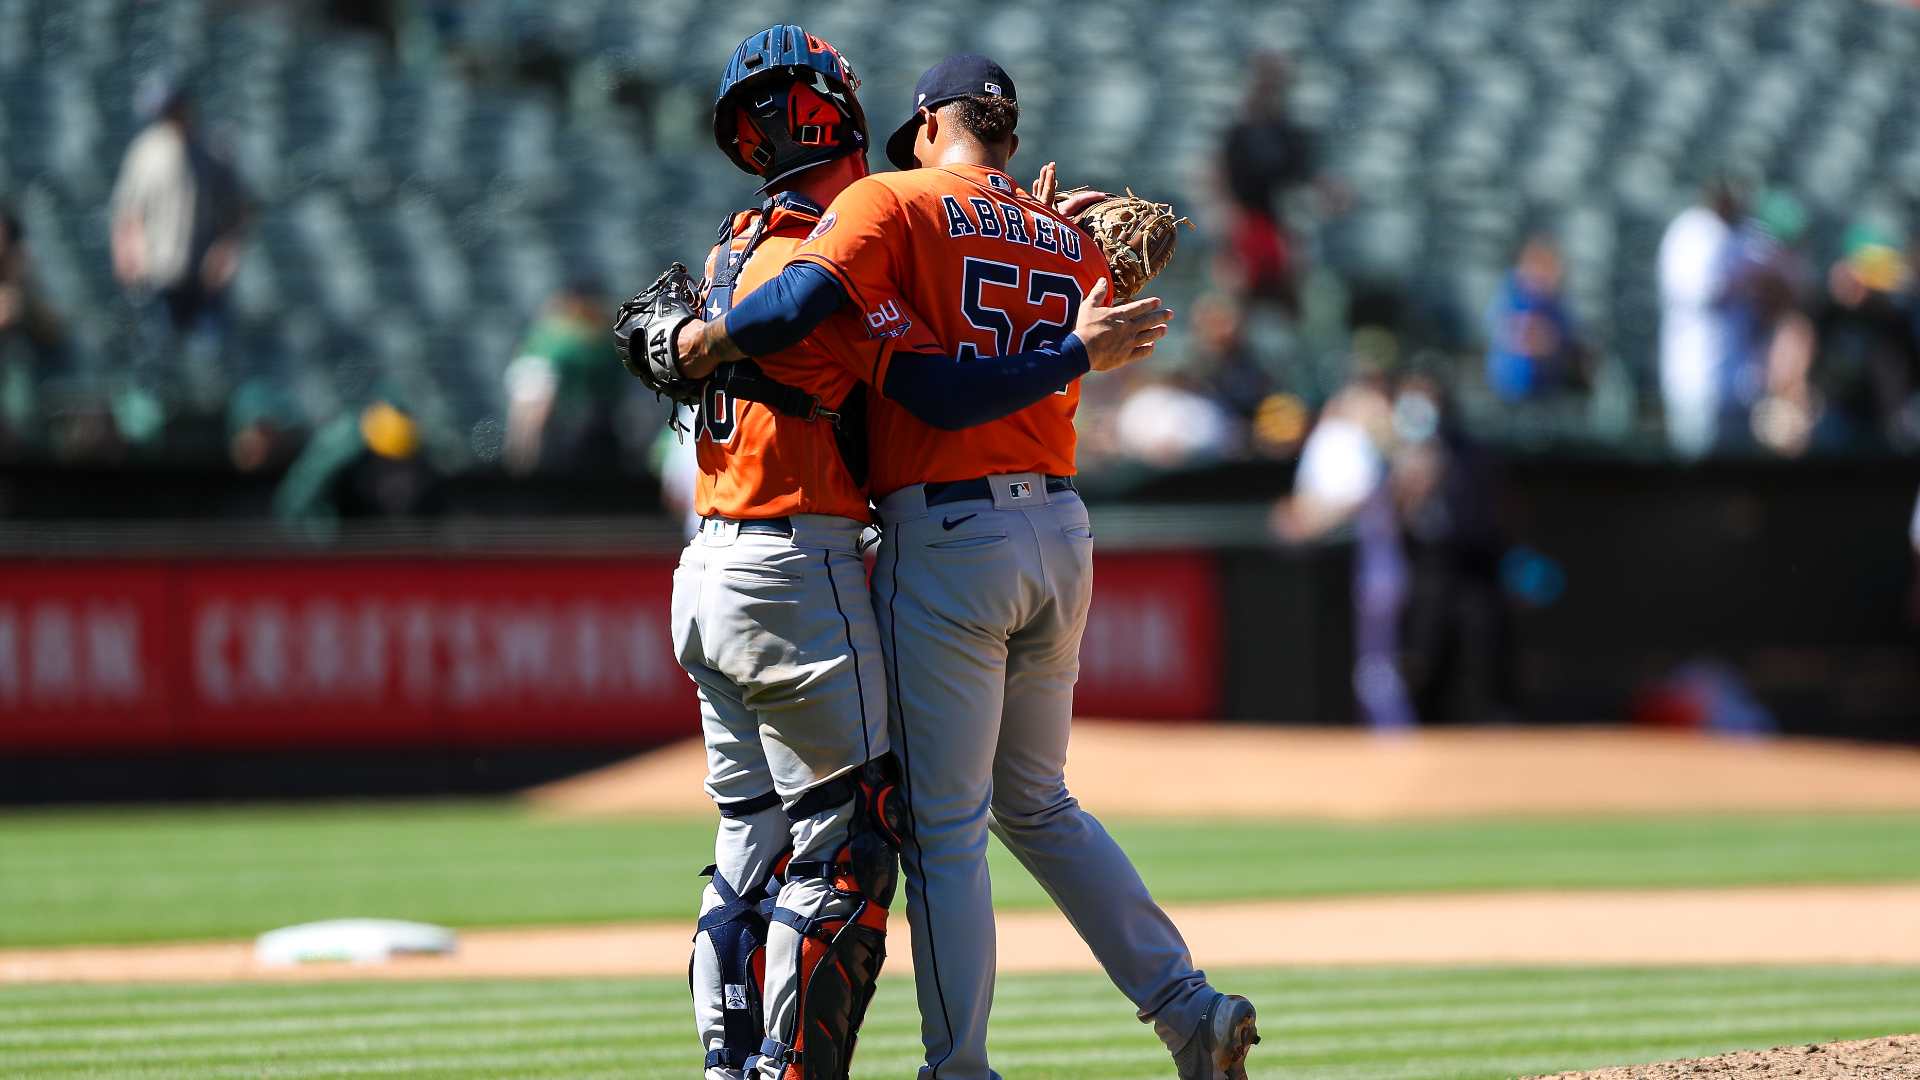 Astros vs Angels MLB Live Stream, Schedule, Lineups, 13 July 2022